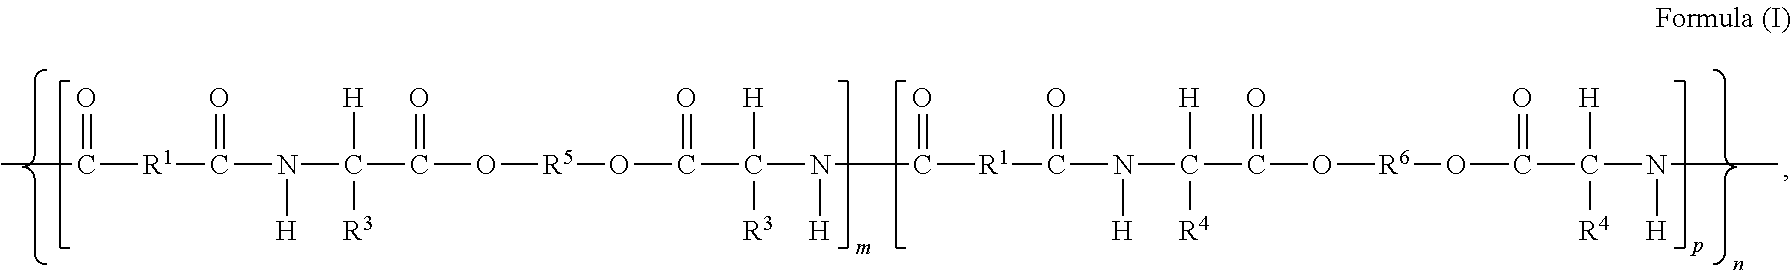 Bis-(alpha-amino)-diol-diester-containing poly (ester amide) and poly (ester urethane) compositions and methods of use